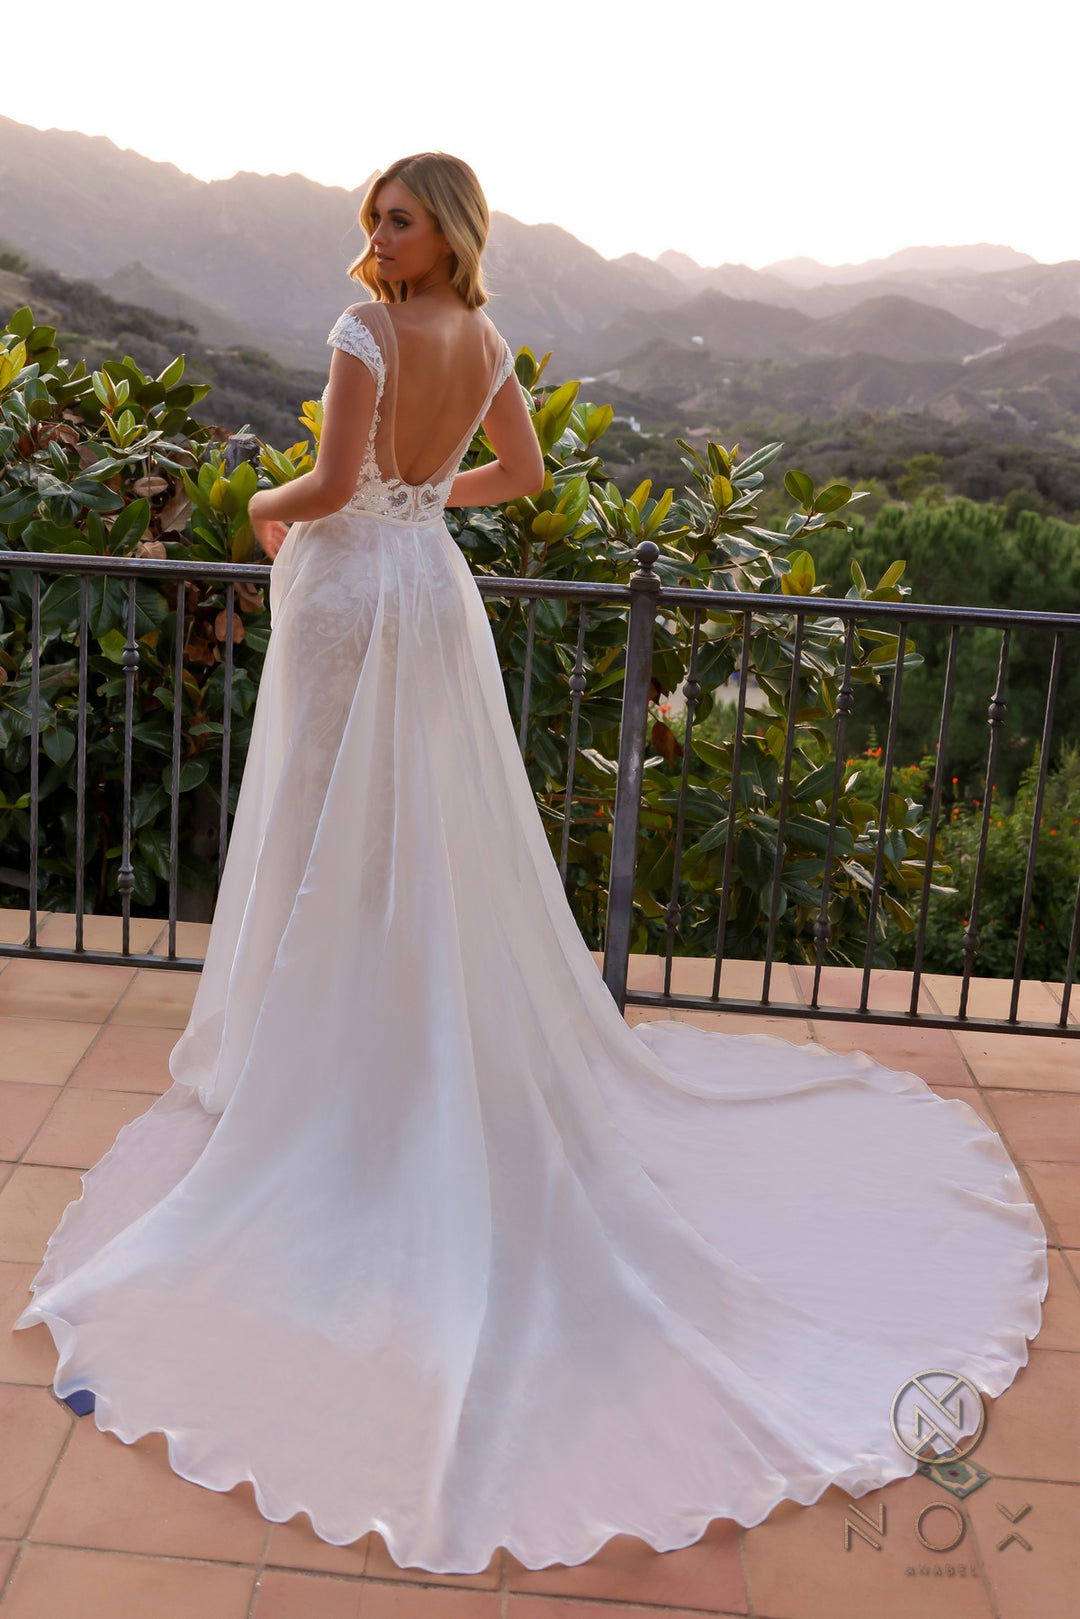 Beaded Cap Sleeve Bridal Overskirt Gown by Nox Anabel JE995L